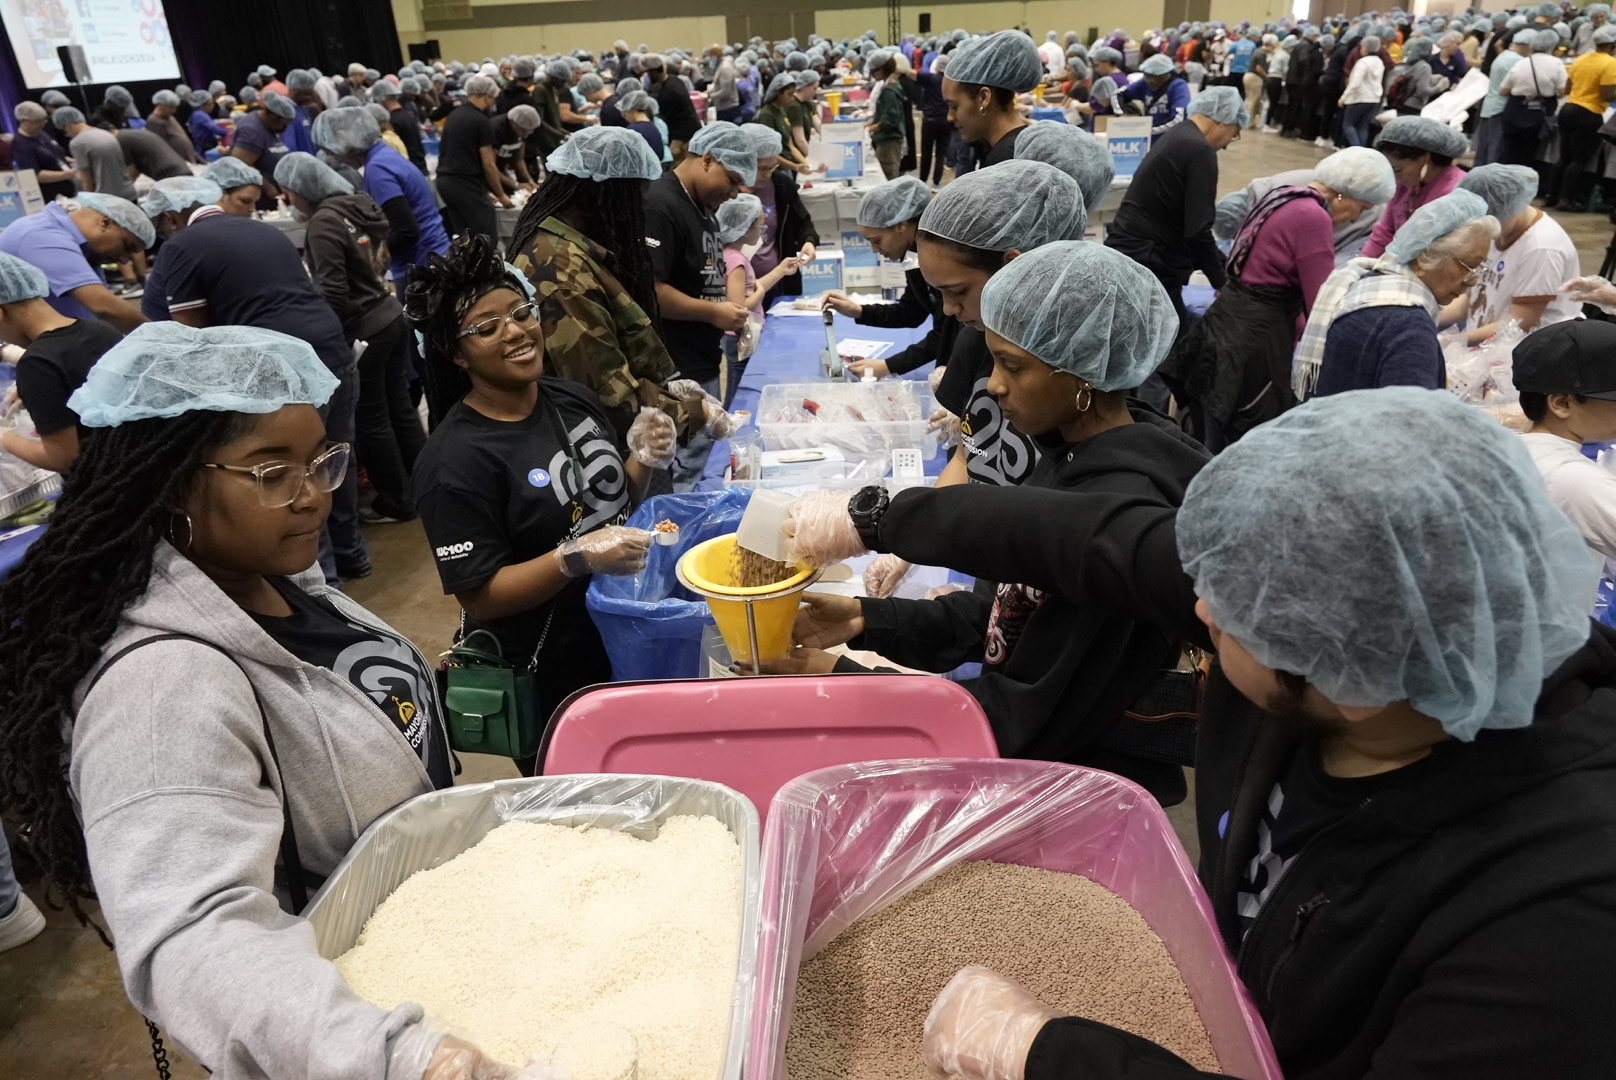 Residents of Orlando united through service to pack meals. 